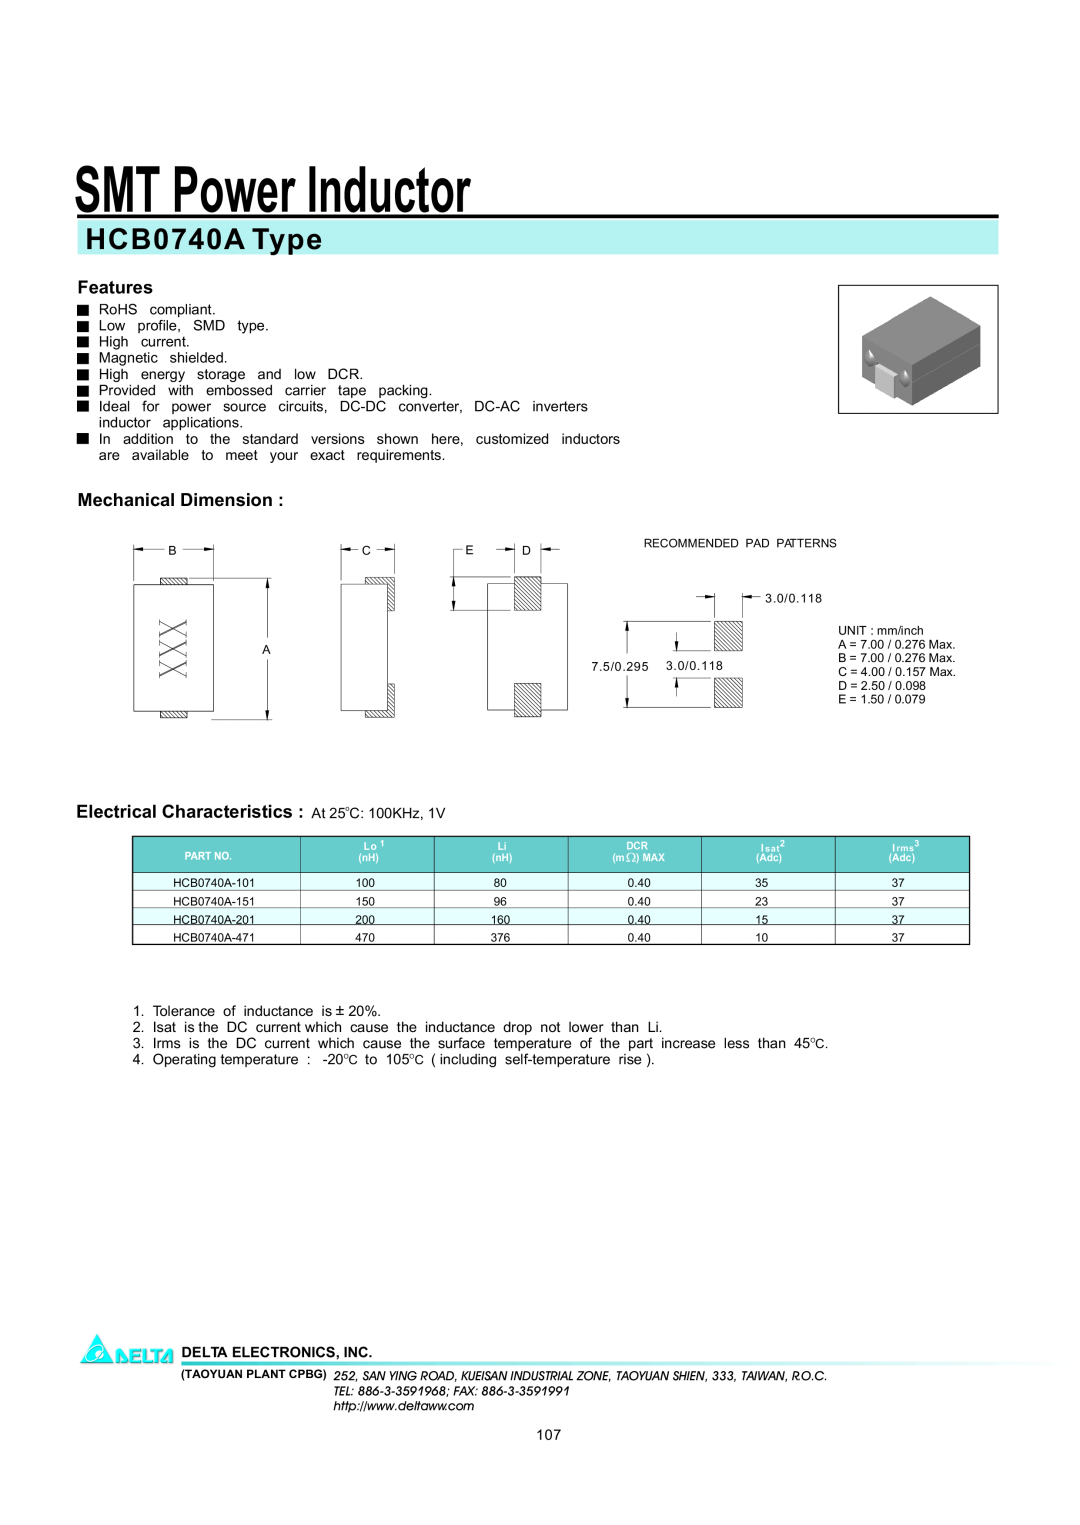 Delta Electronics manual SMT Power Inductor, HCB0740A Type, Features, Mechanical Dimension, Delta Electronics, Inc 